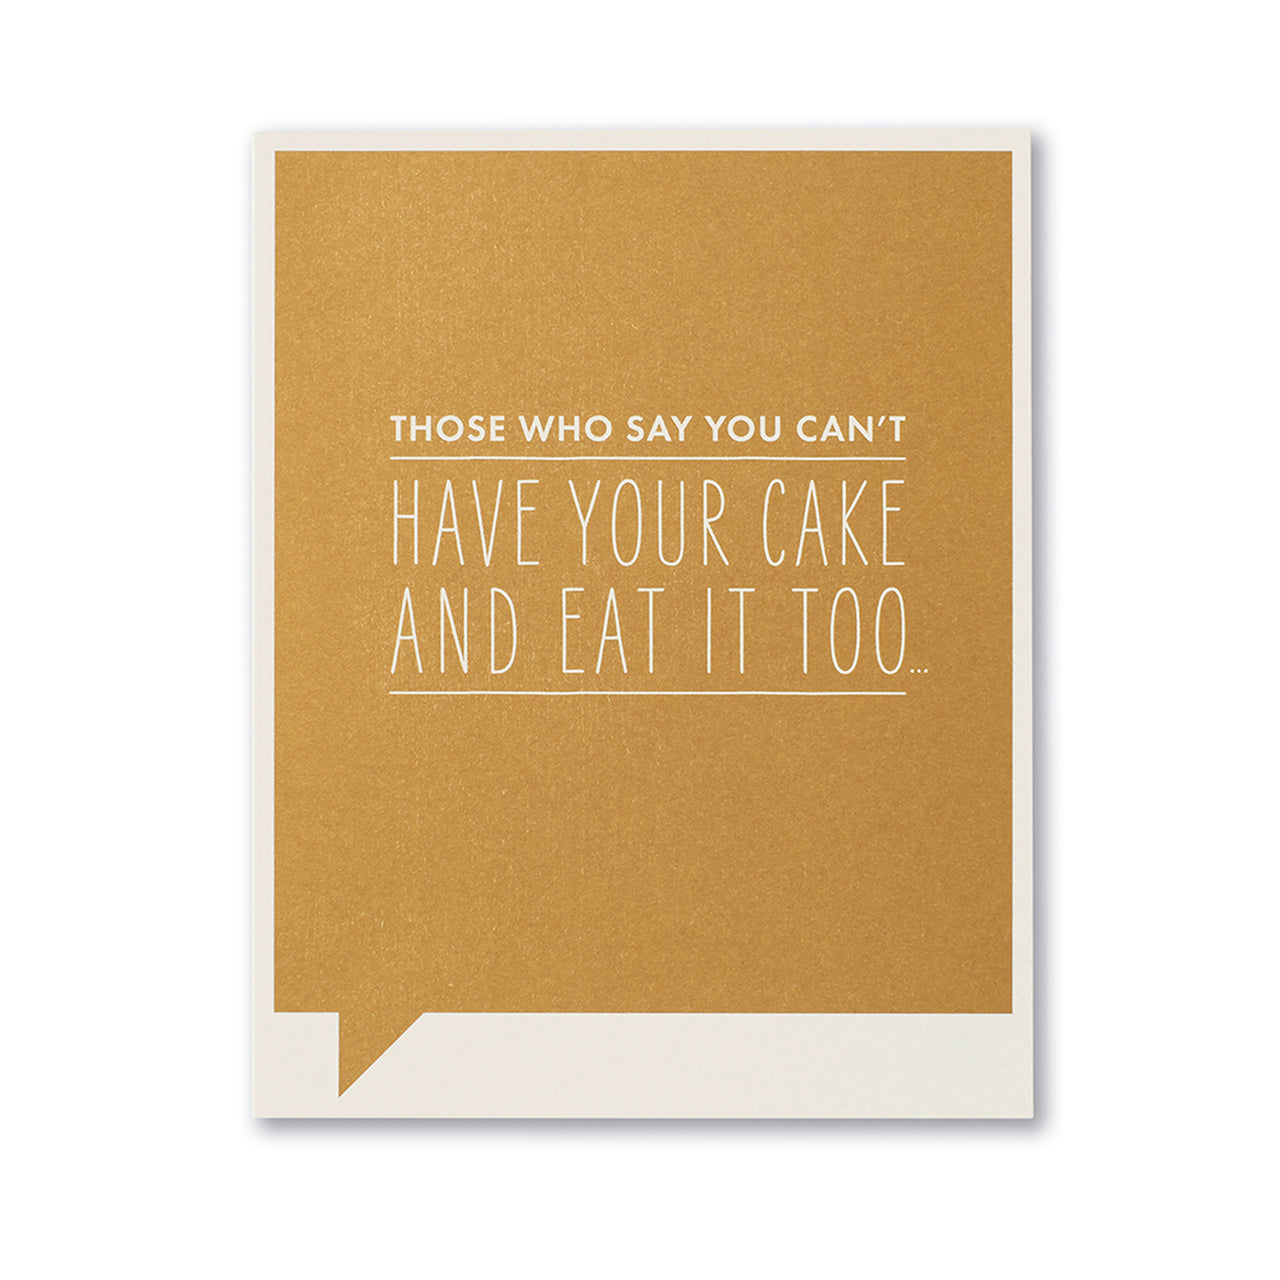 Frank and Funny Greeting Card - Birthday - Those Who Say You Can't Have Your Cake... - Mellow Monkey